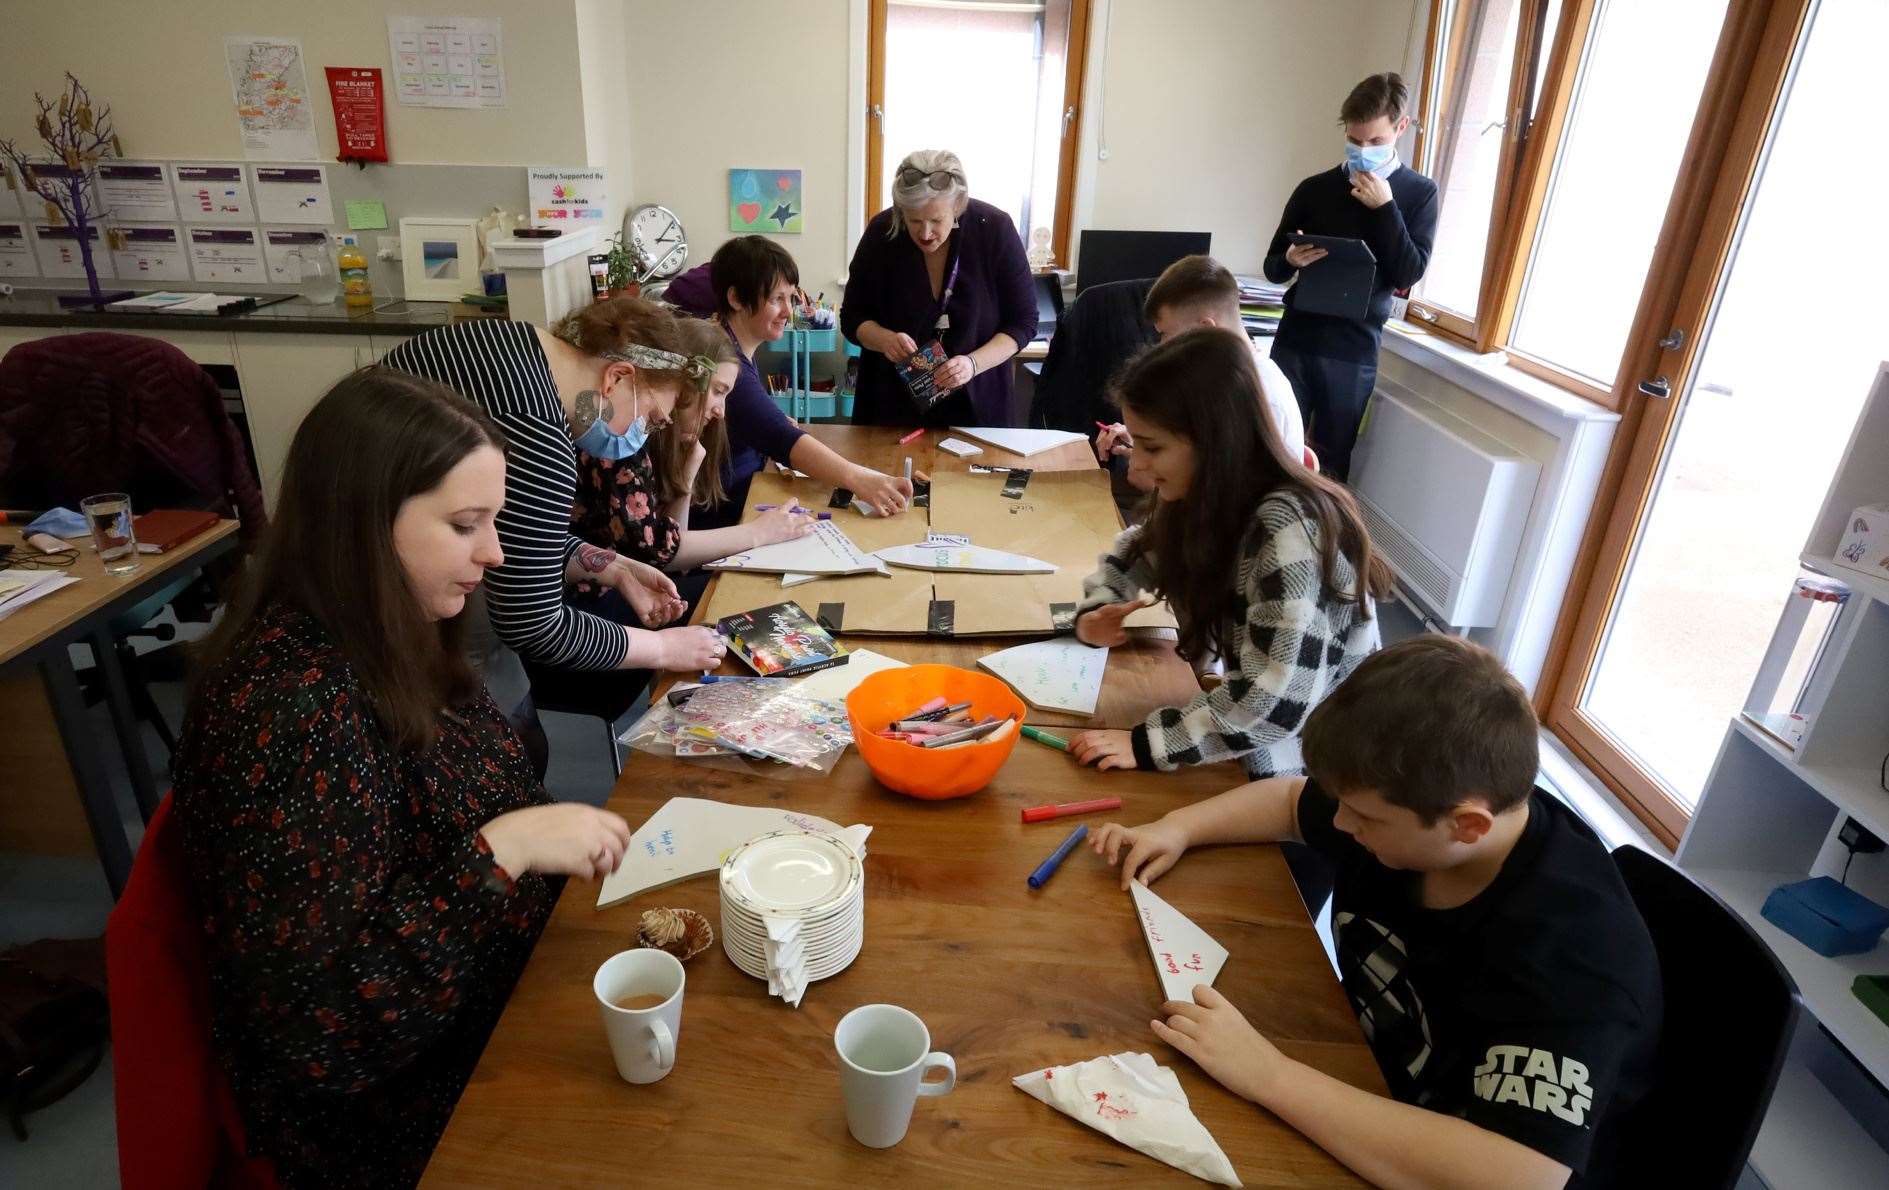 Everyone decorating their cracked piece of porcelain. Picture: James Mackenzie